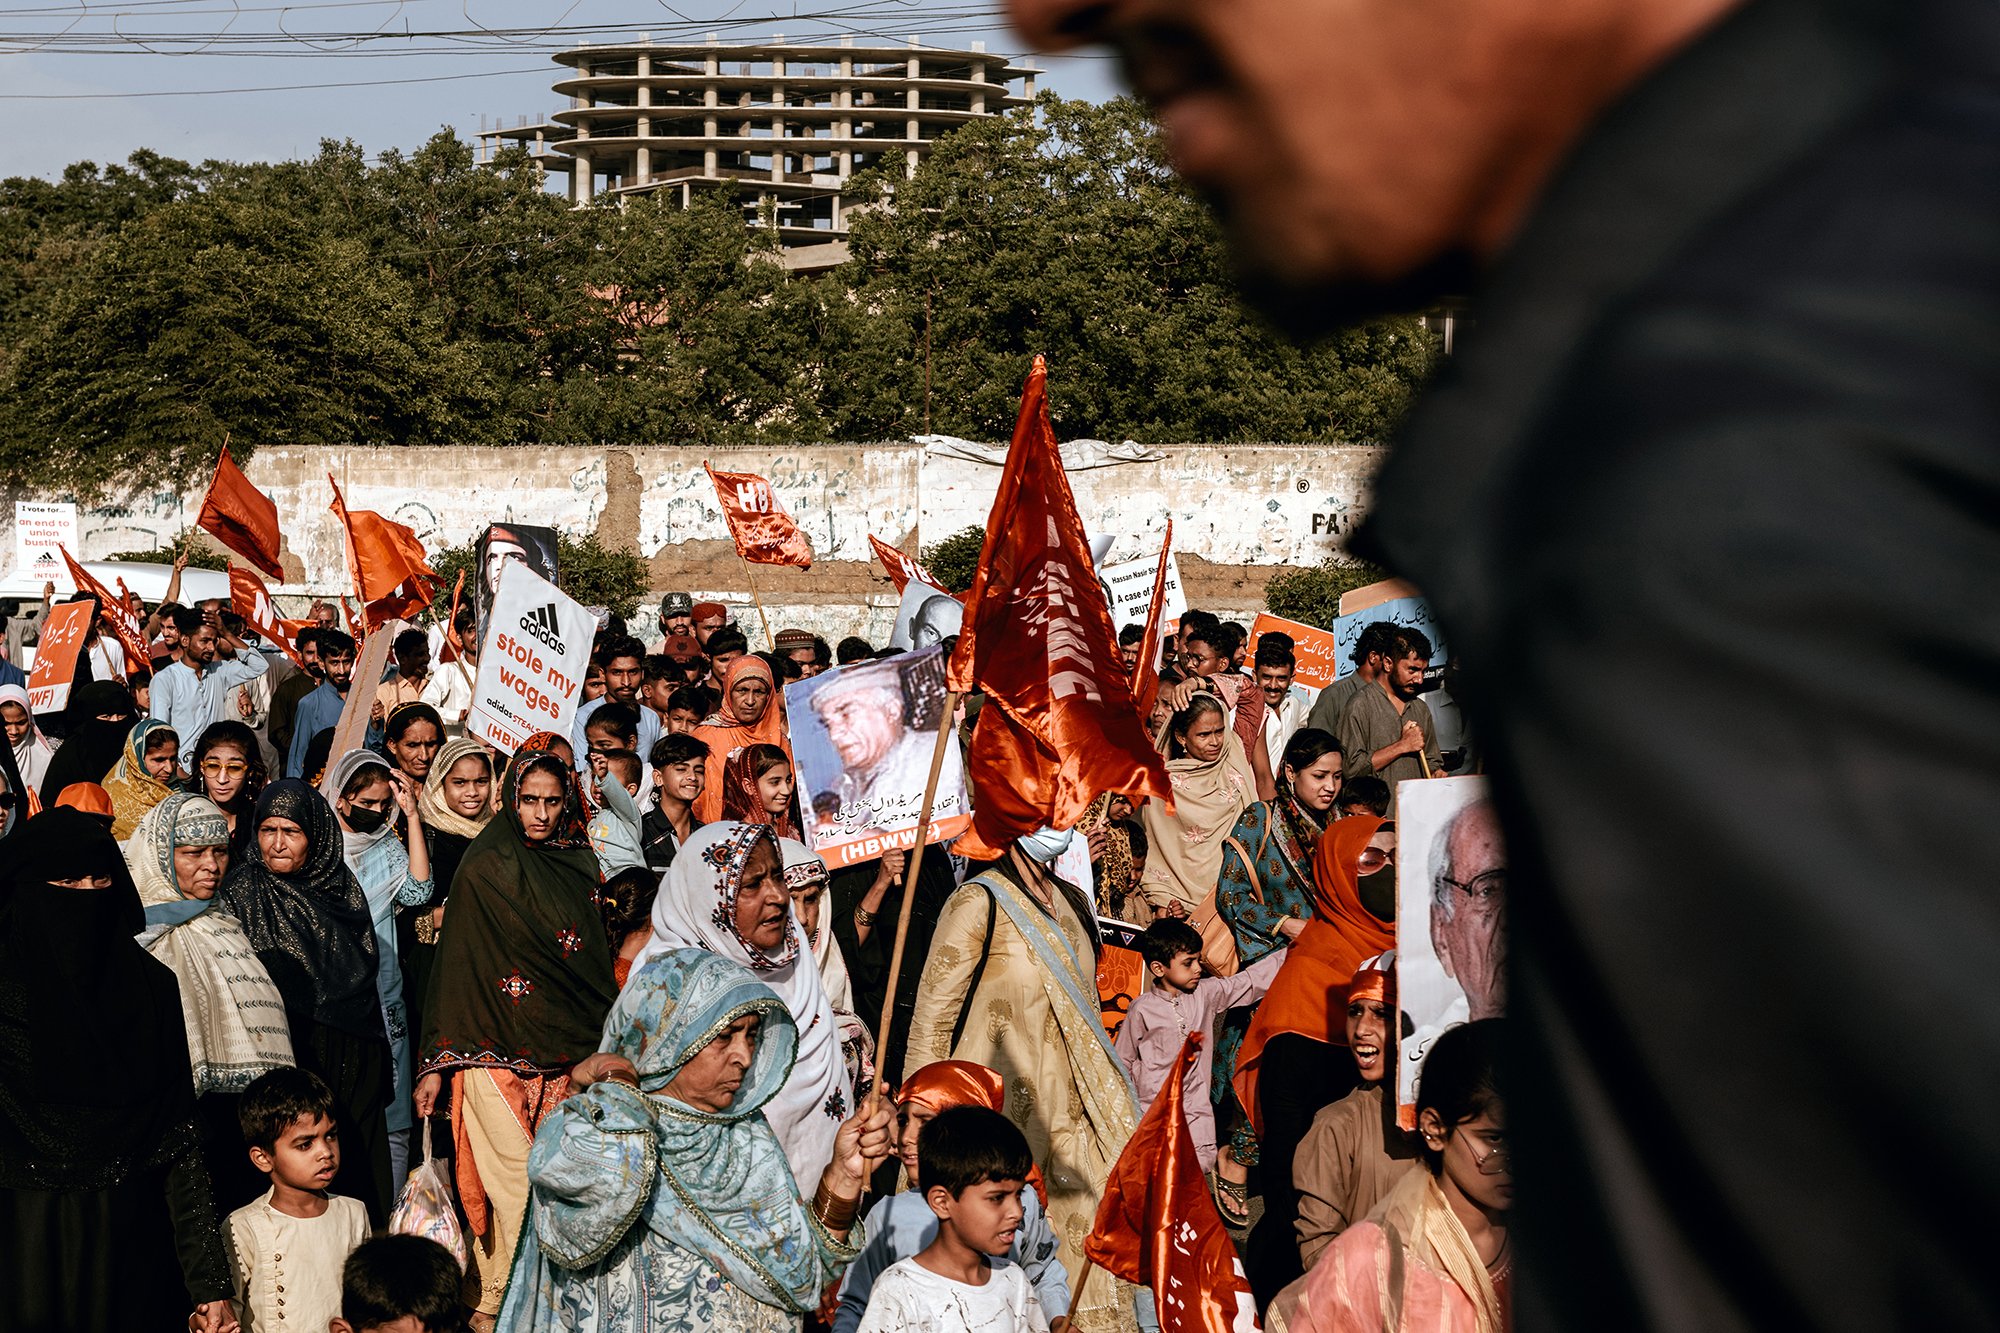 A lot of women participate in big Mayday demonstration in Karachi, Pakistan.